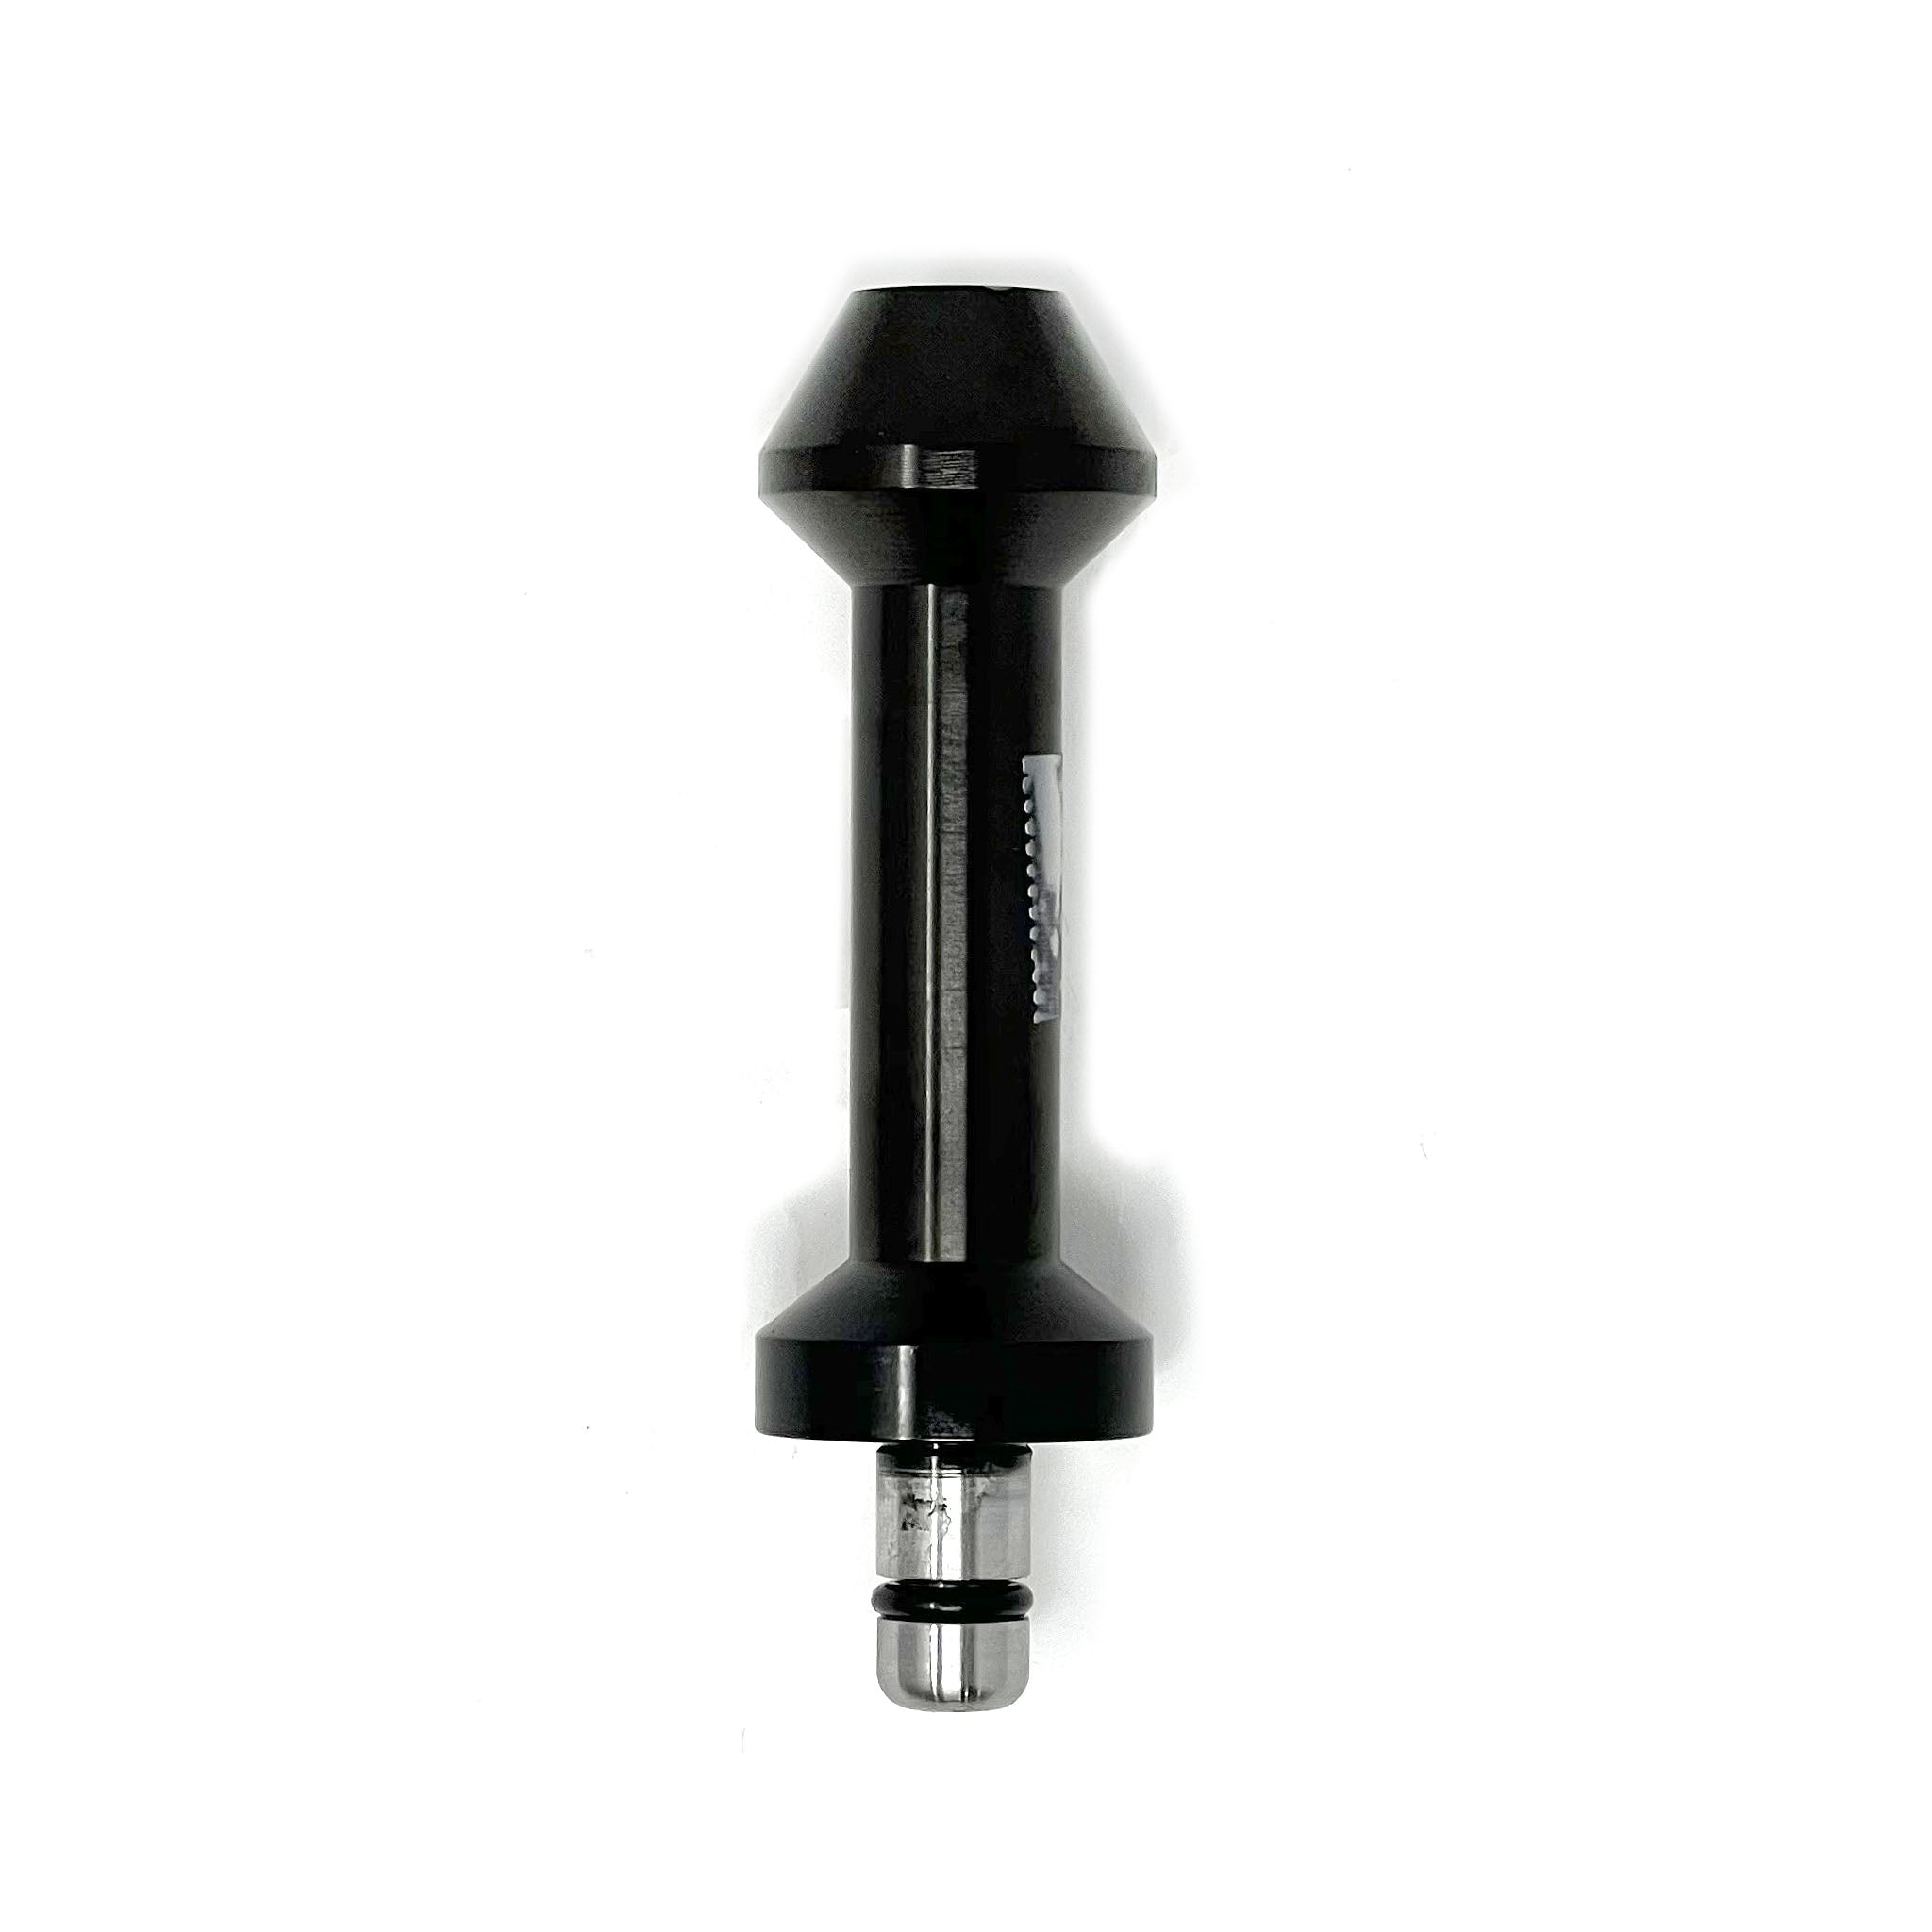 Wide taper Stud (A) for pin plate 3.2 Long" for Wheel Balancer